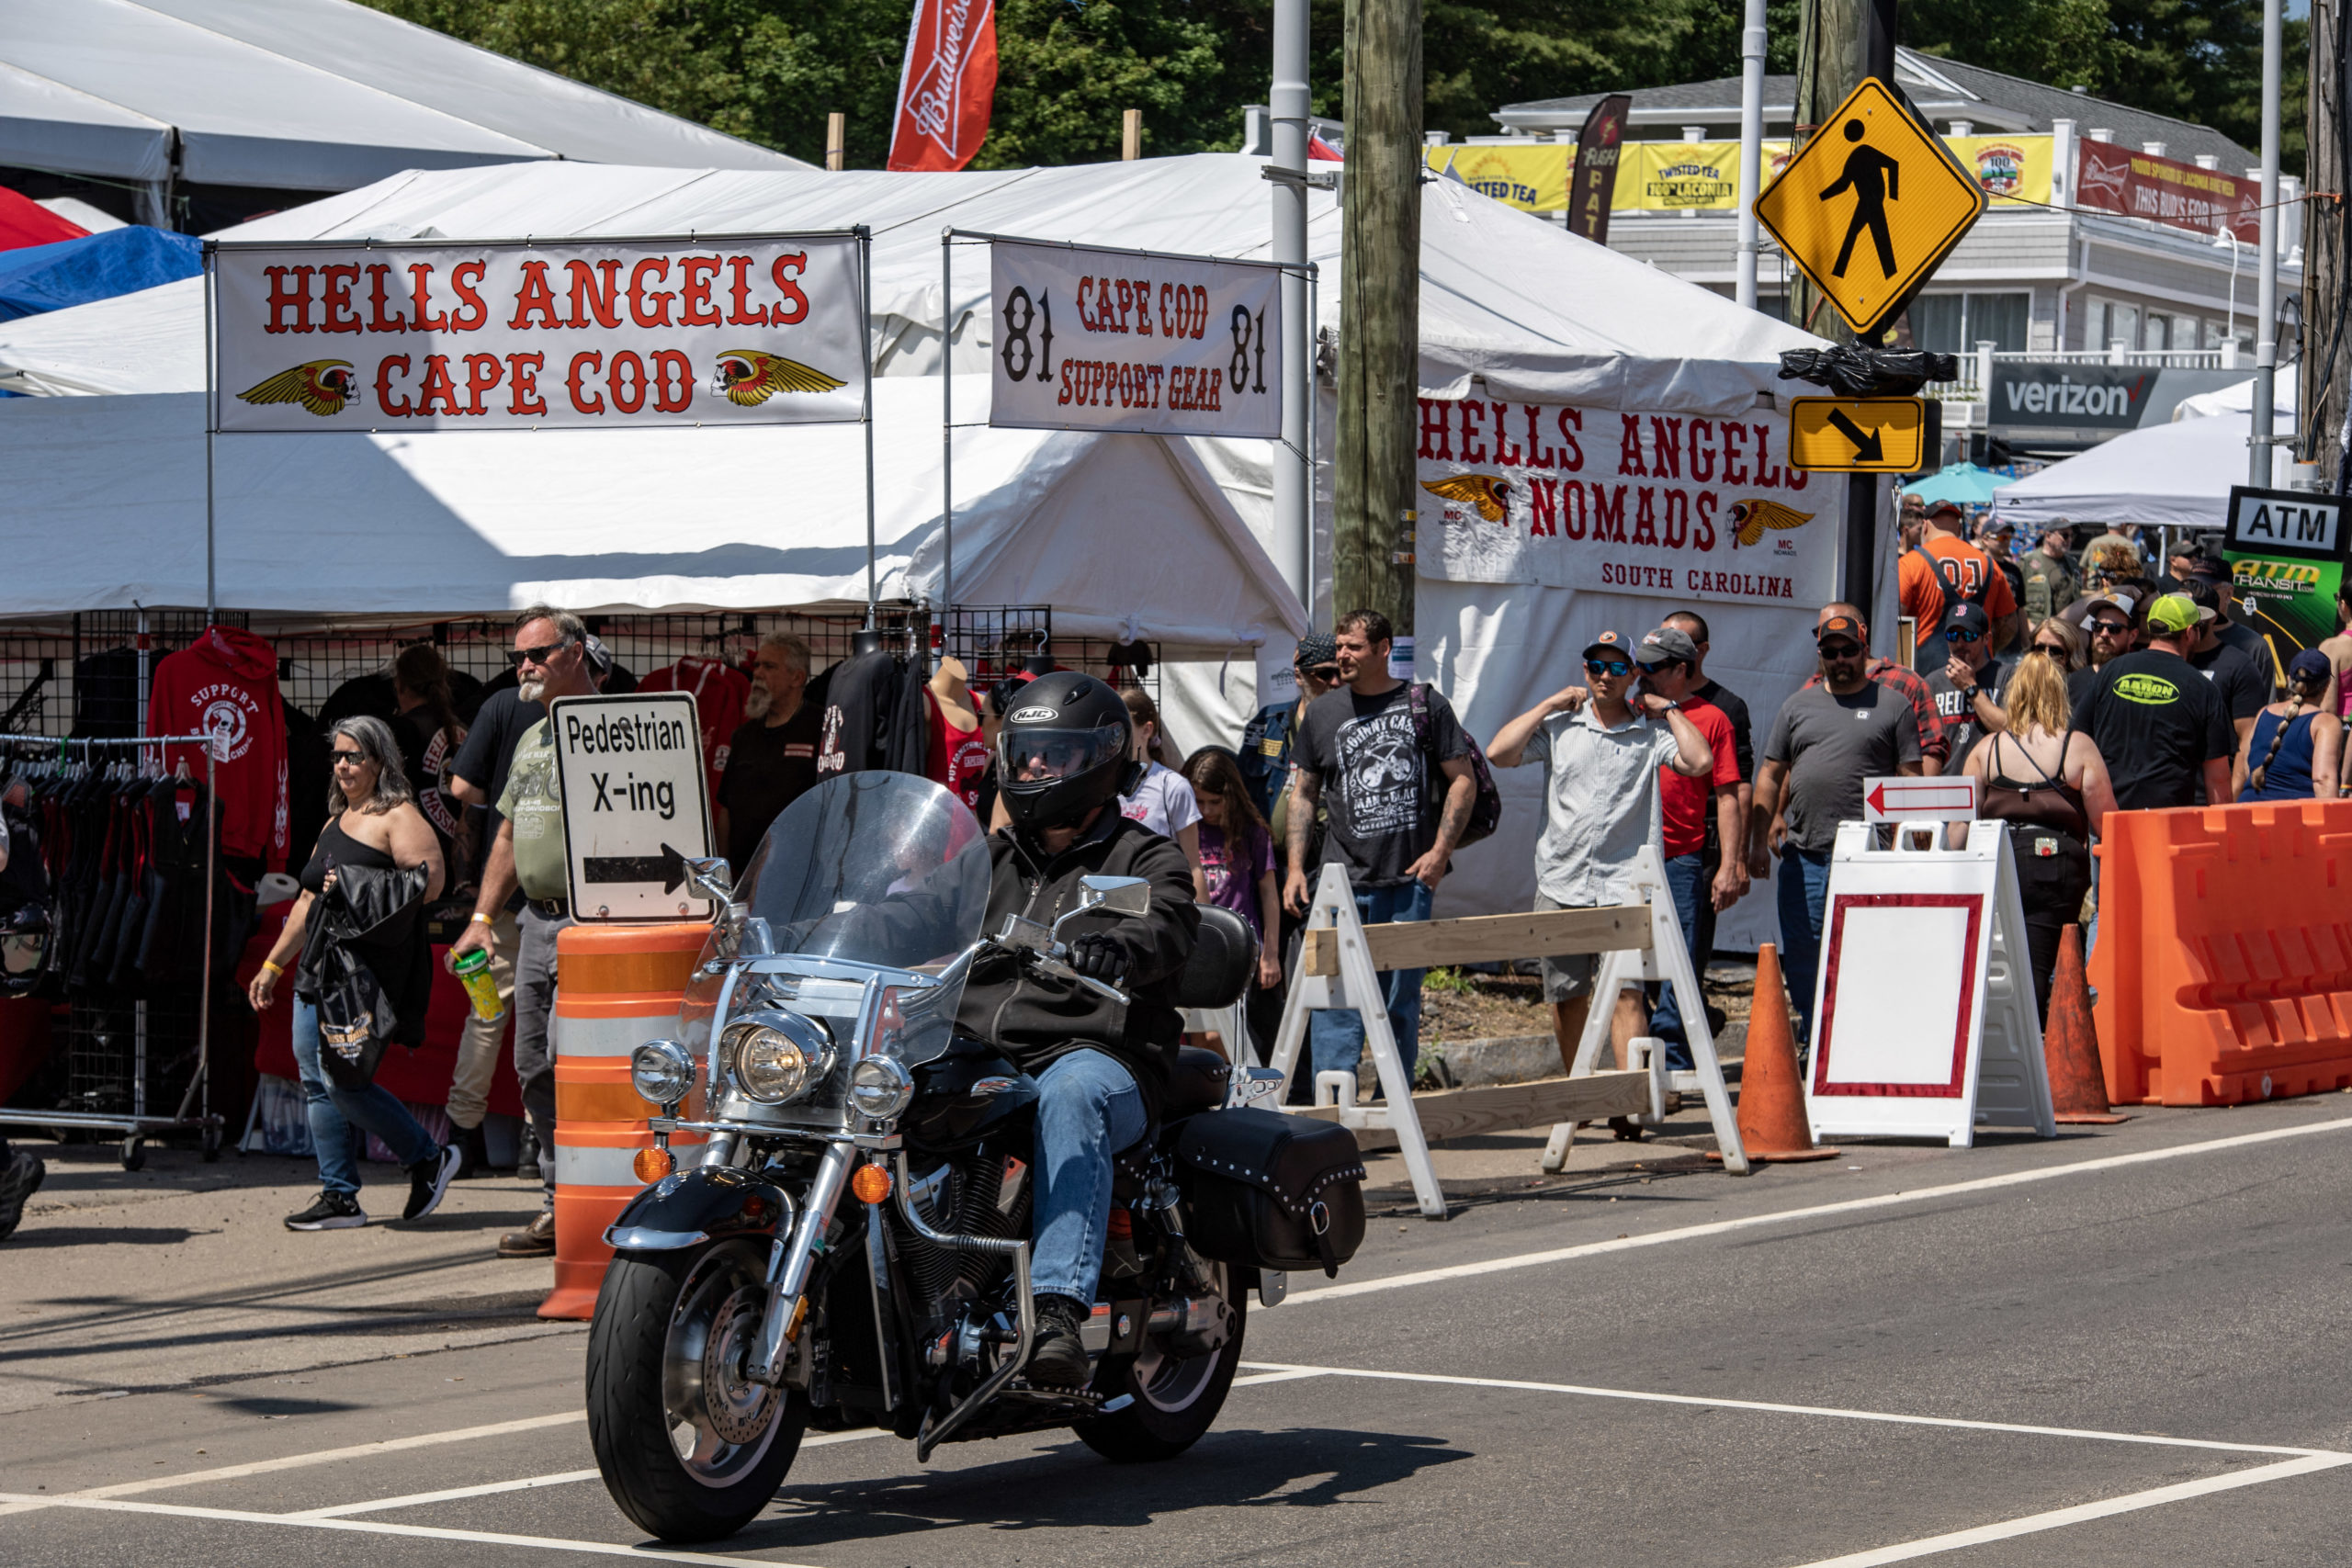 The motorcylce gang known as Hell's Angels runs a vendor booth during the 100th anniversary of the Laconia Motorcycle Week in Laconia, New Hampshire, on June 11, 2023. The rally, which is expected to bring in over 300,000 motorcyclists, is considered to be the oldest in the US. The event runs from June 10 to June 19. (Photo by JOSEPH PREZIOSO/AFP via Getty Images)